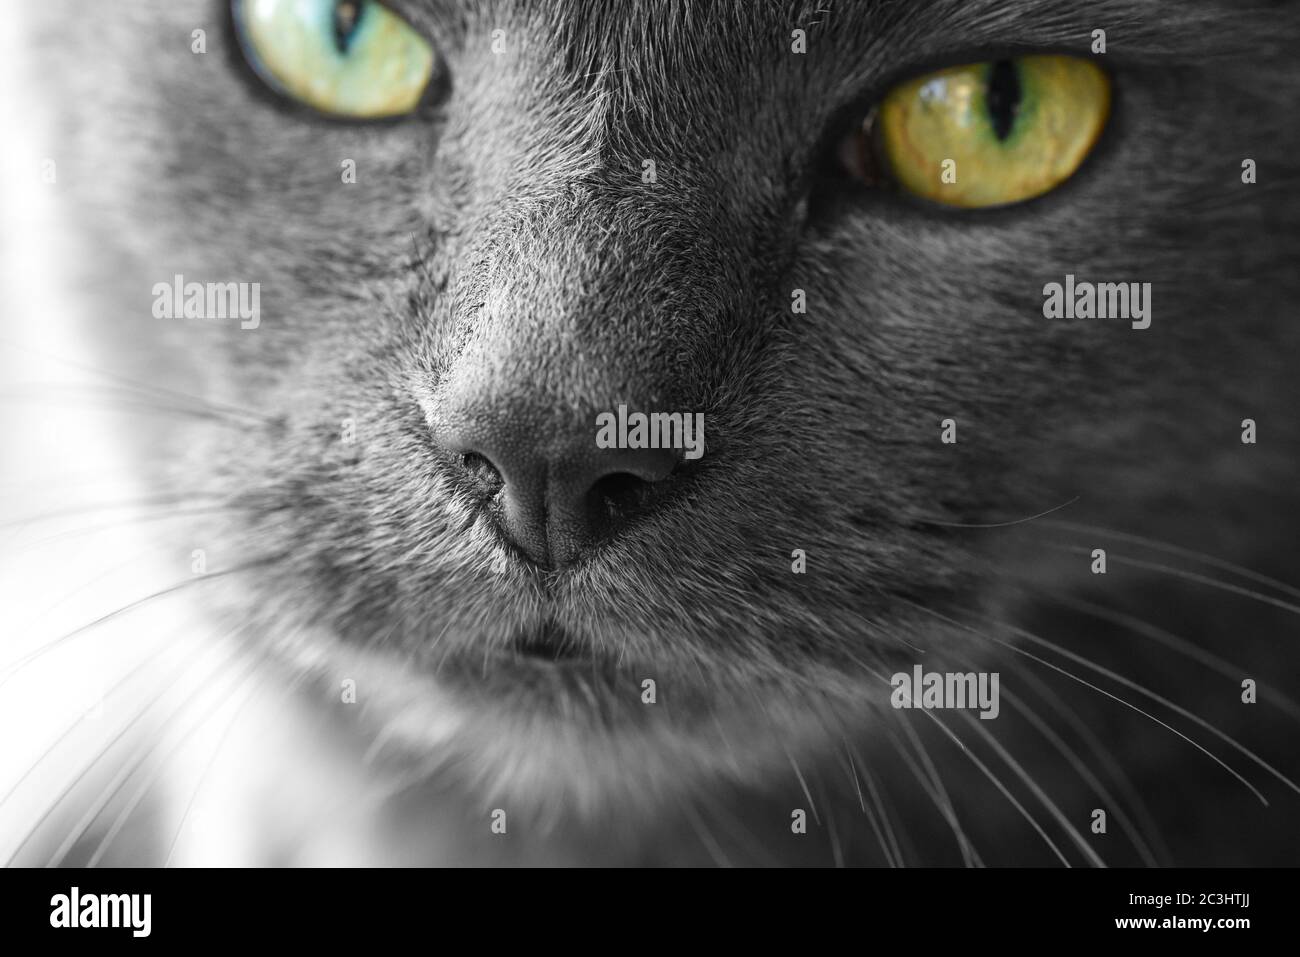 Close up of russian blue cross cat's face Stock Photo